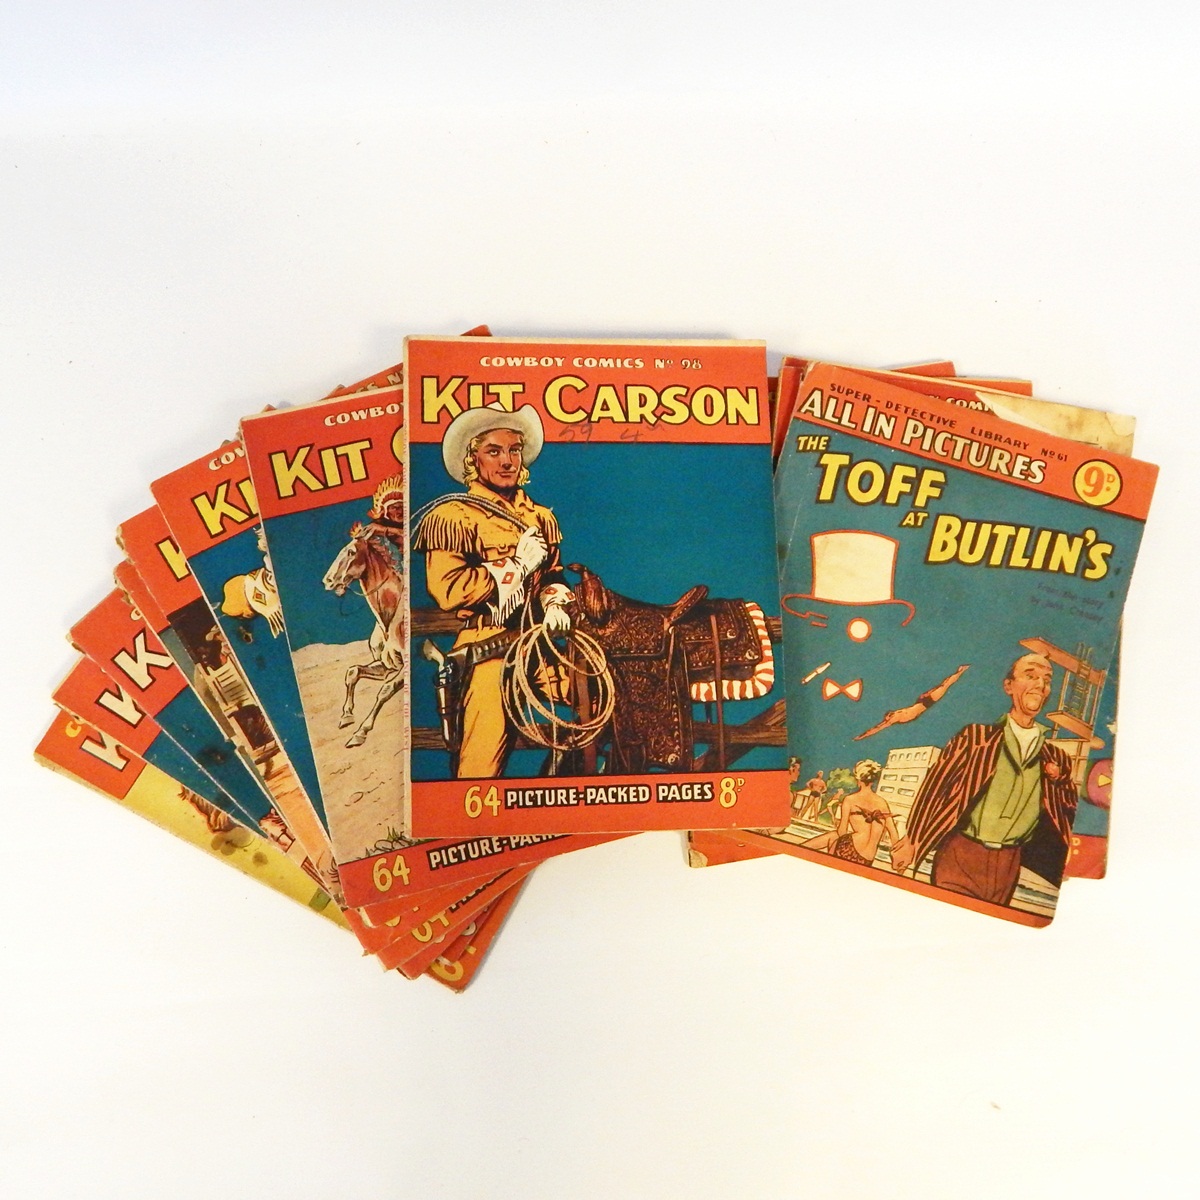 Quantity of Kit Carson comics ranging from No.38 to No.98, Toff Butlins No.